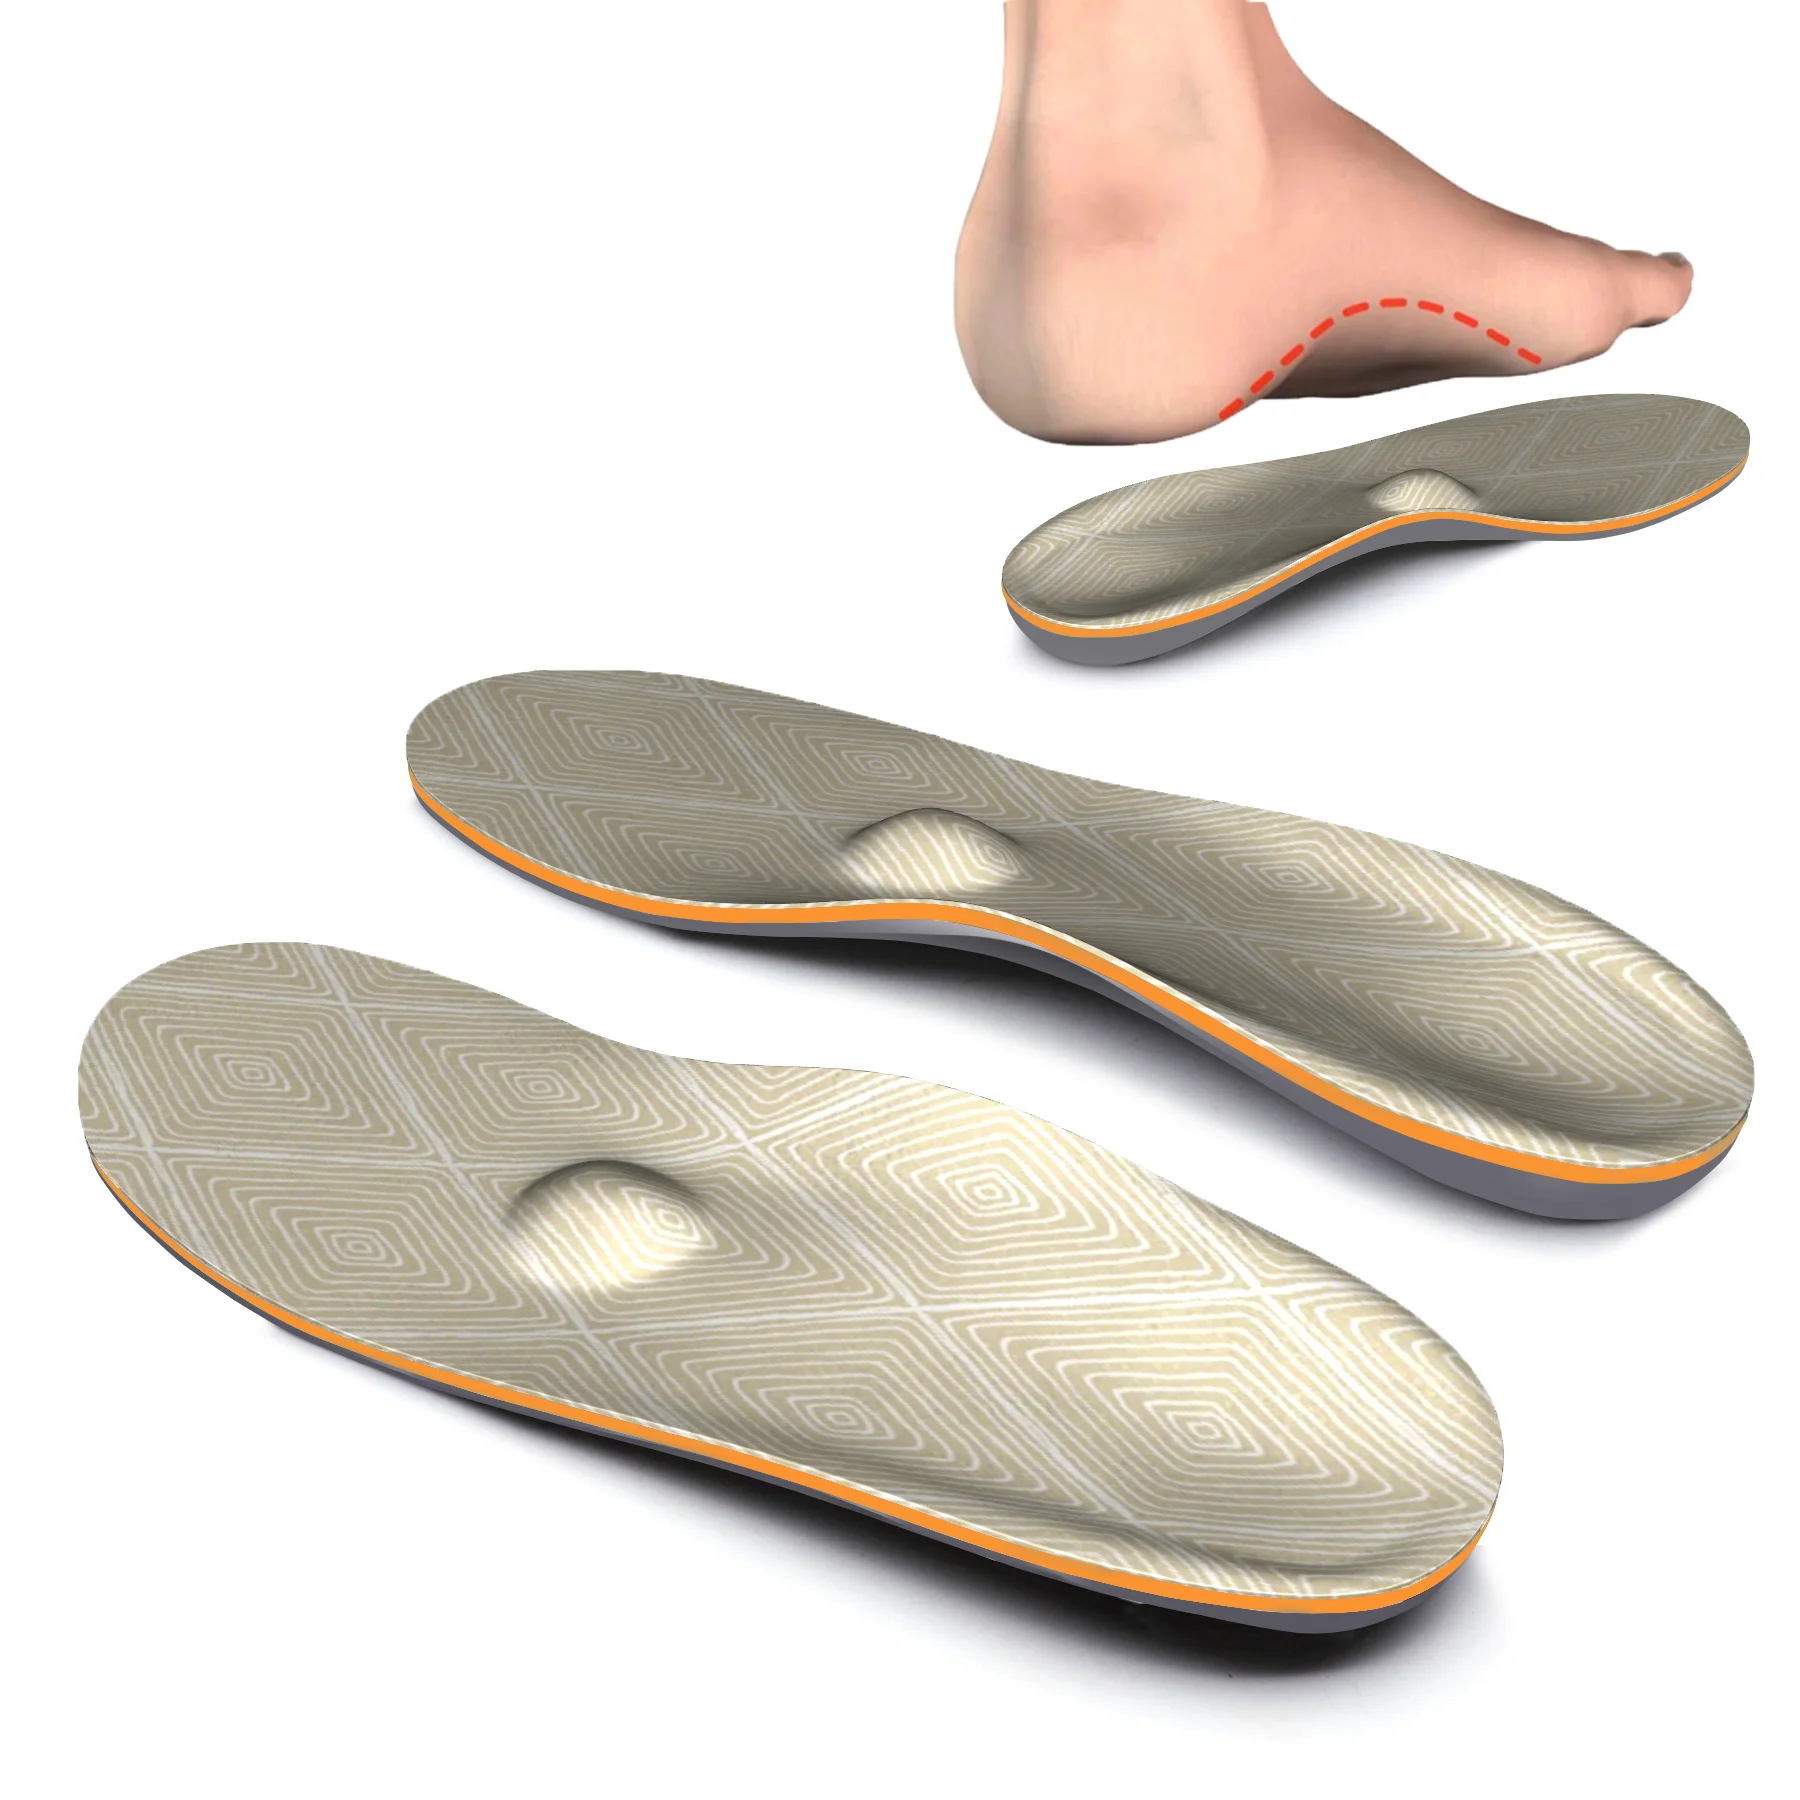 Wheat Design Memory Foam Arch Supports Orthotic Shoe Inserts EaseFlat Feet, High Arch, Foot Pain For Women and Men iFitna